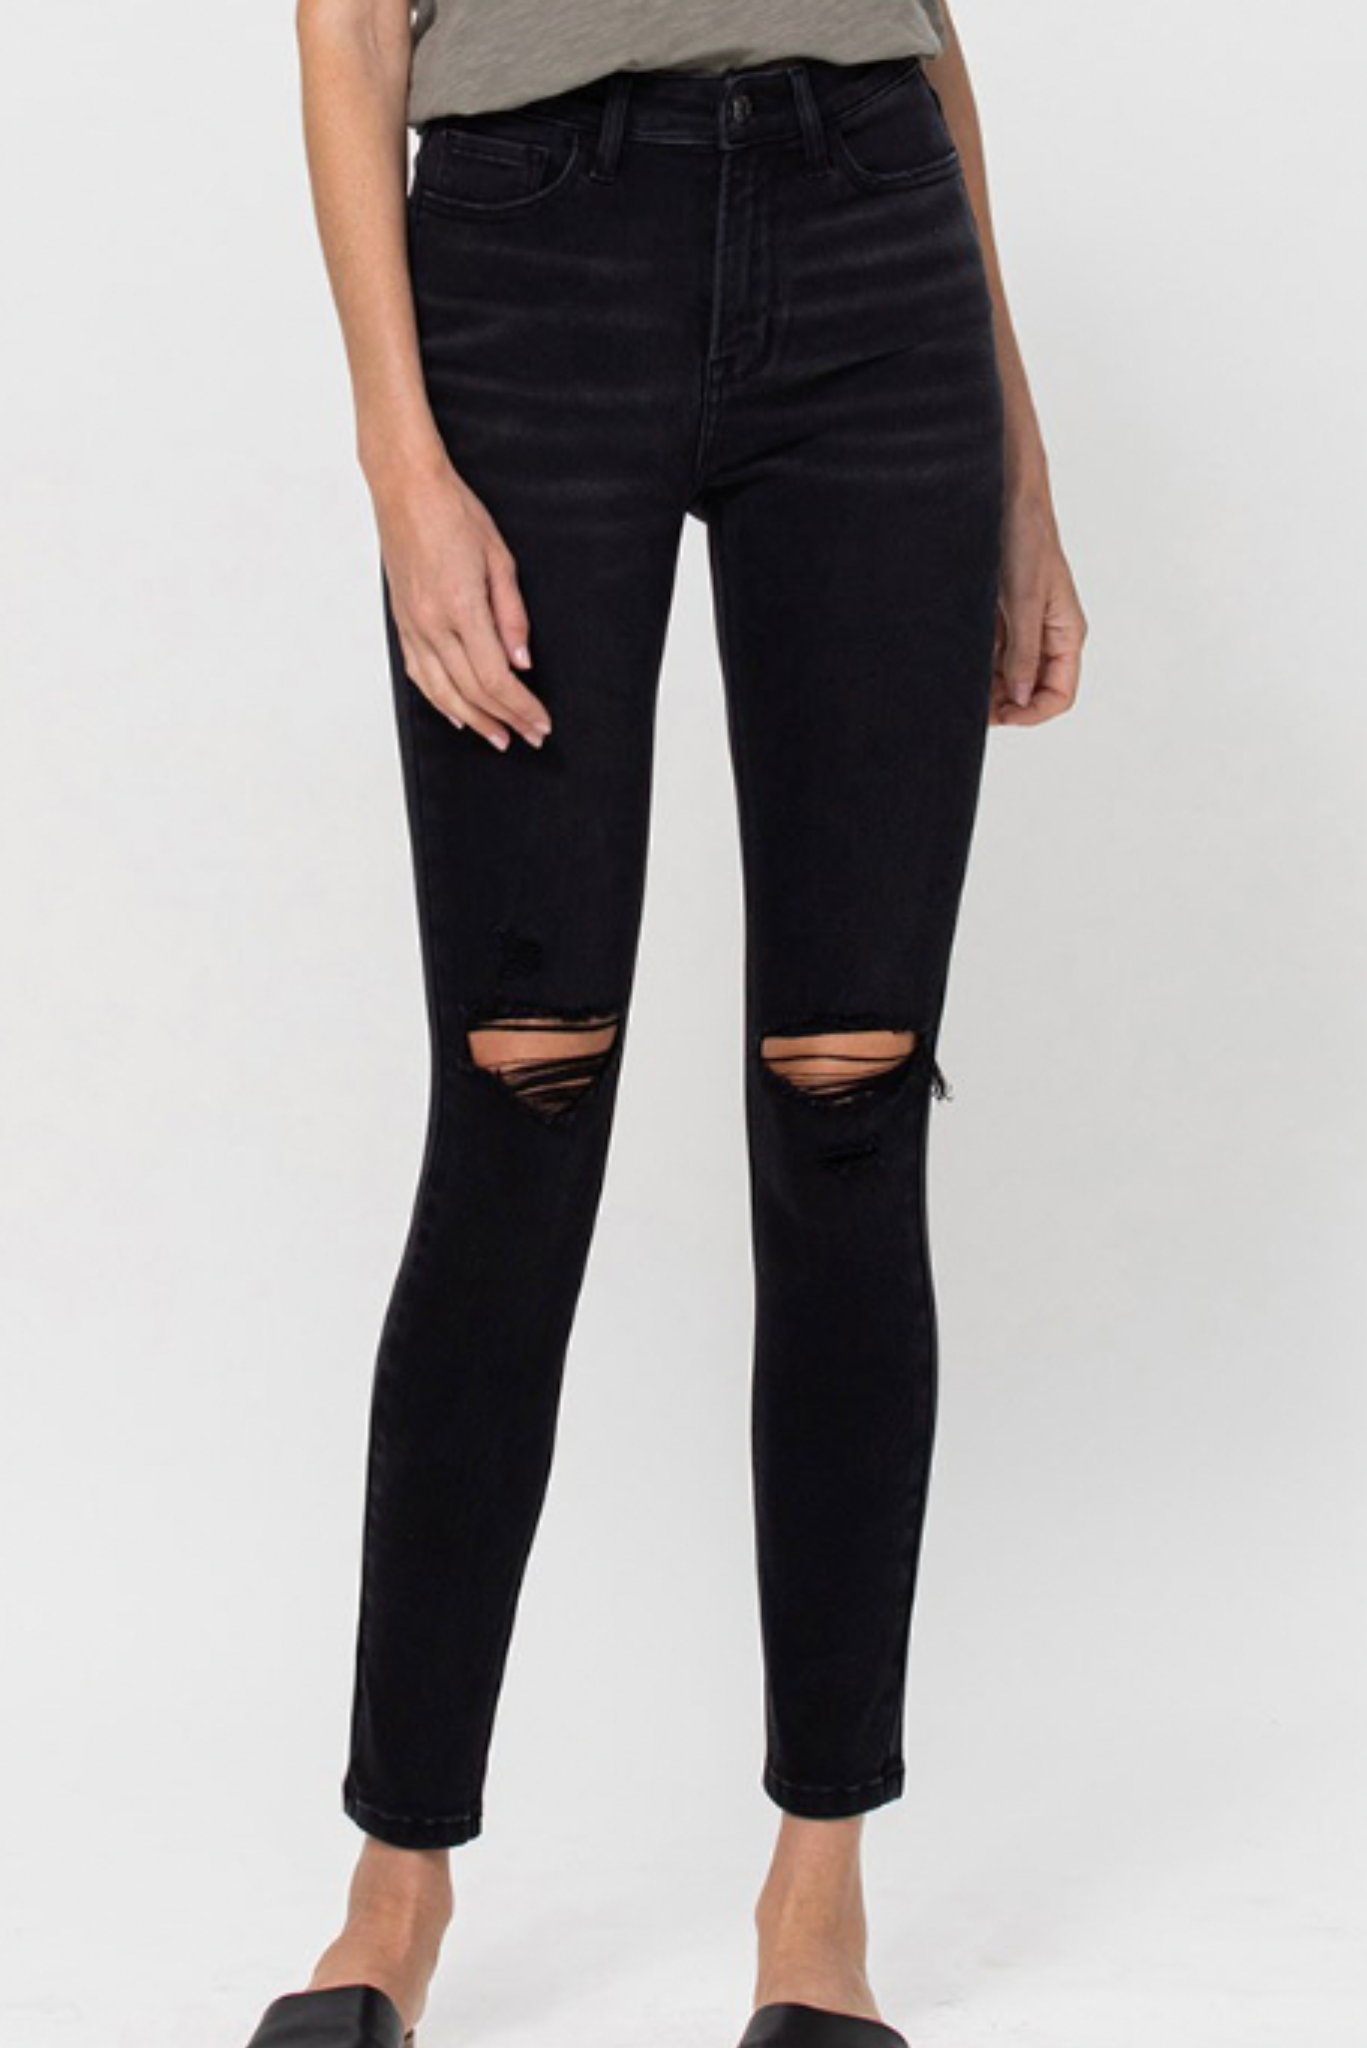 Black High Rise Distressed Skinny Jeans, black jeans, skinny black denim, distressed black denim, Shop Style Your Senses By Mallory Fitzsimmons